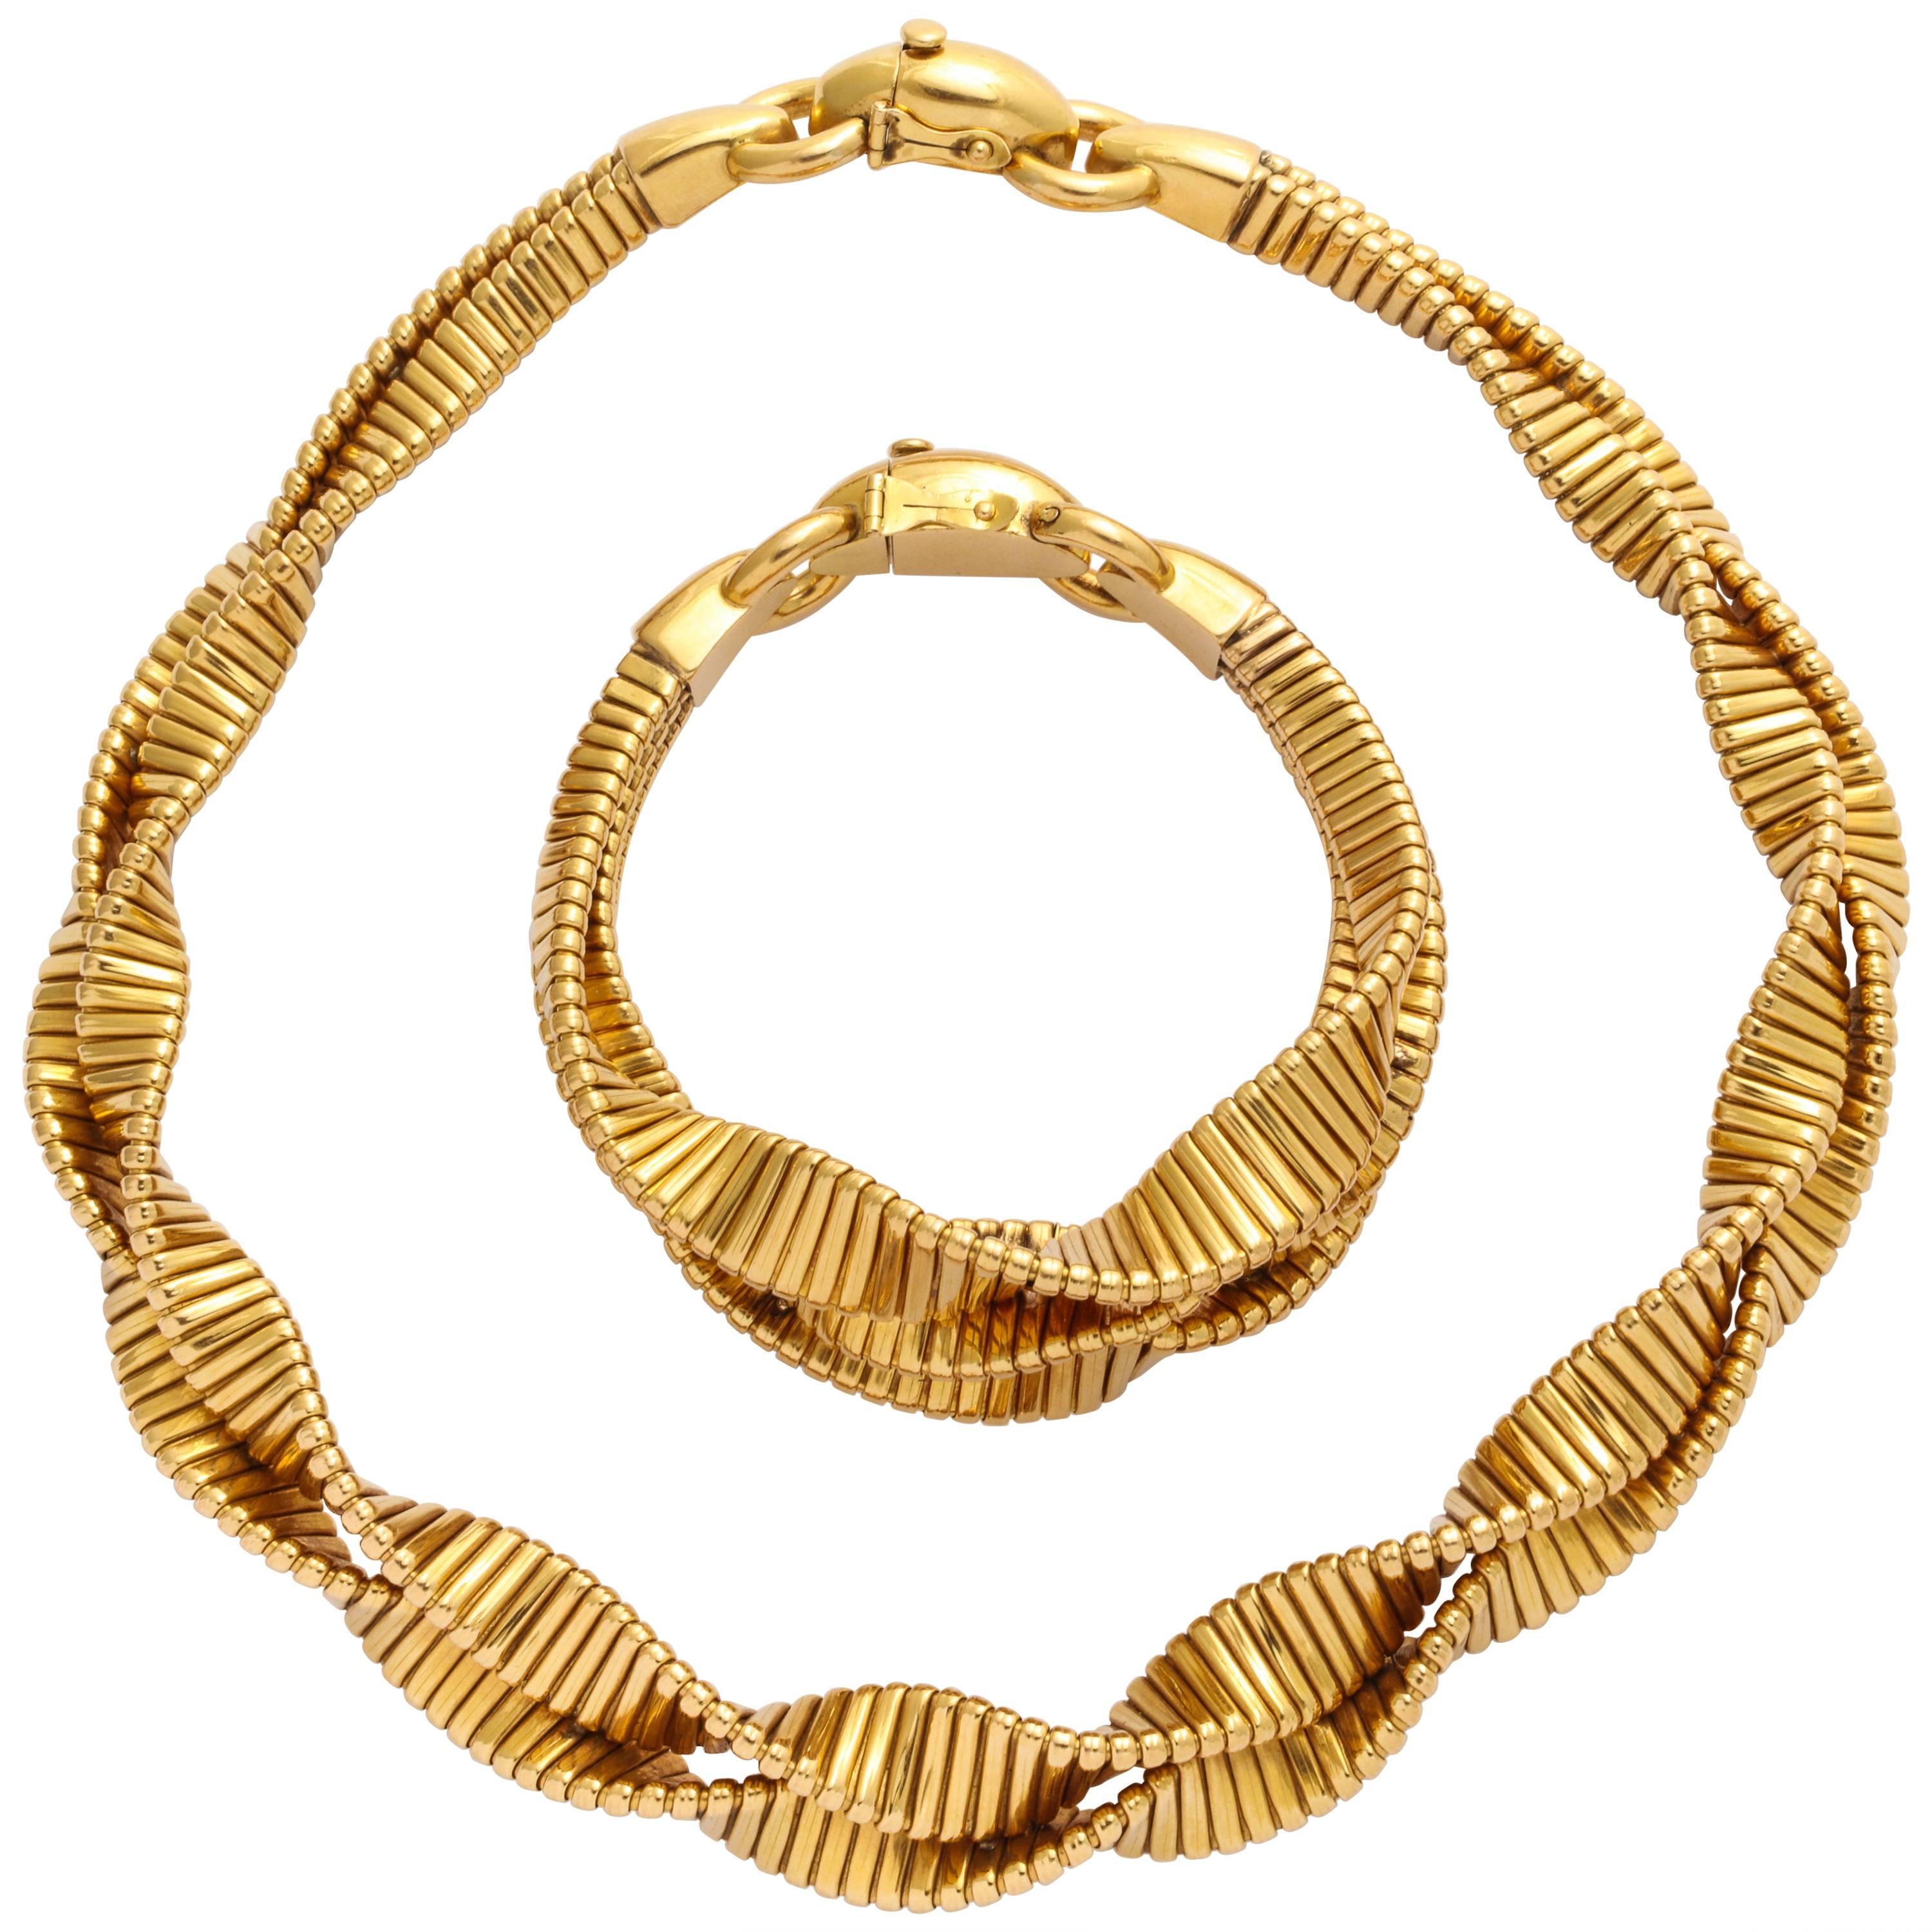 French Twist Retro Tube-Gas Gold Necklace and Bracelet